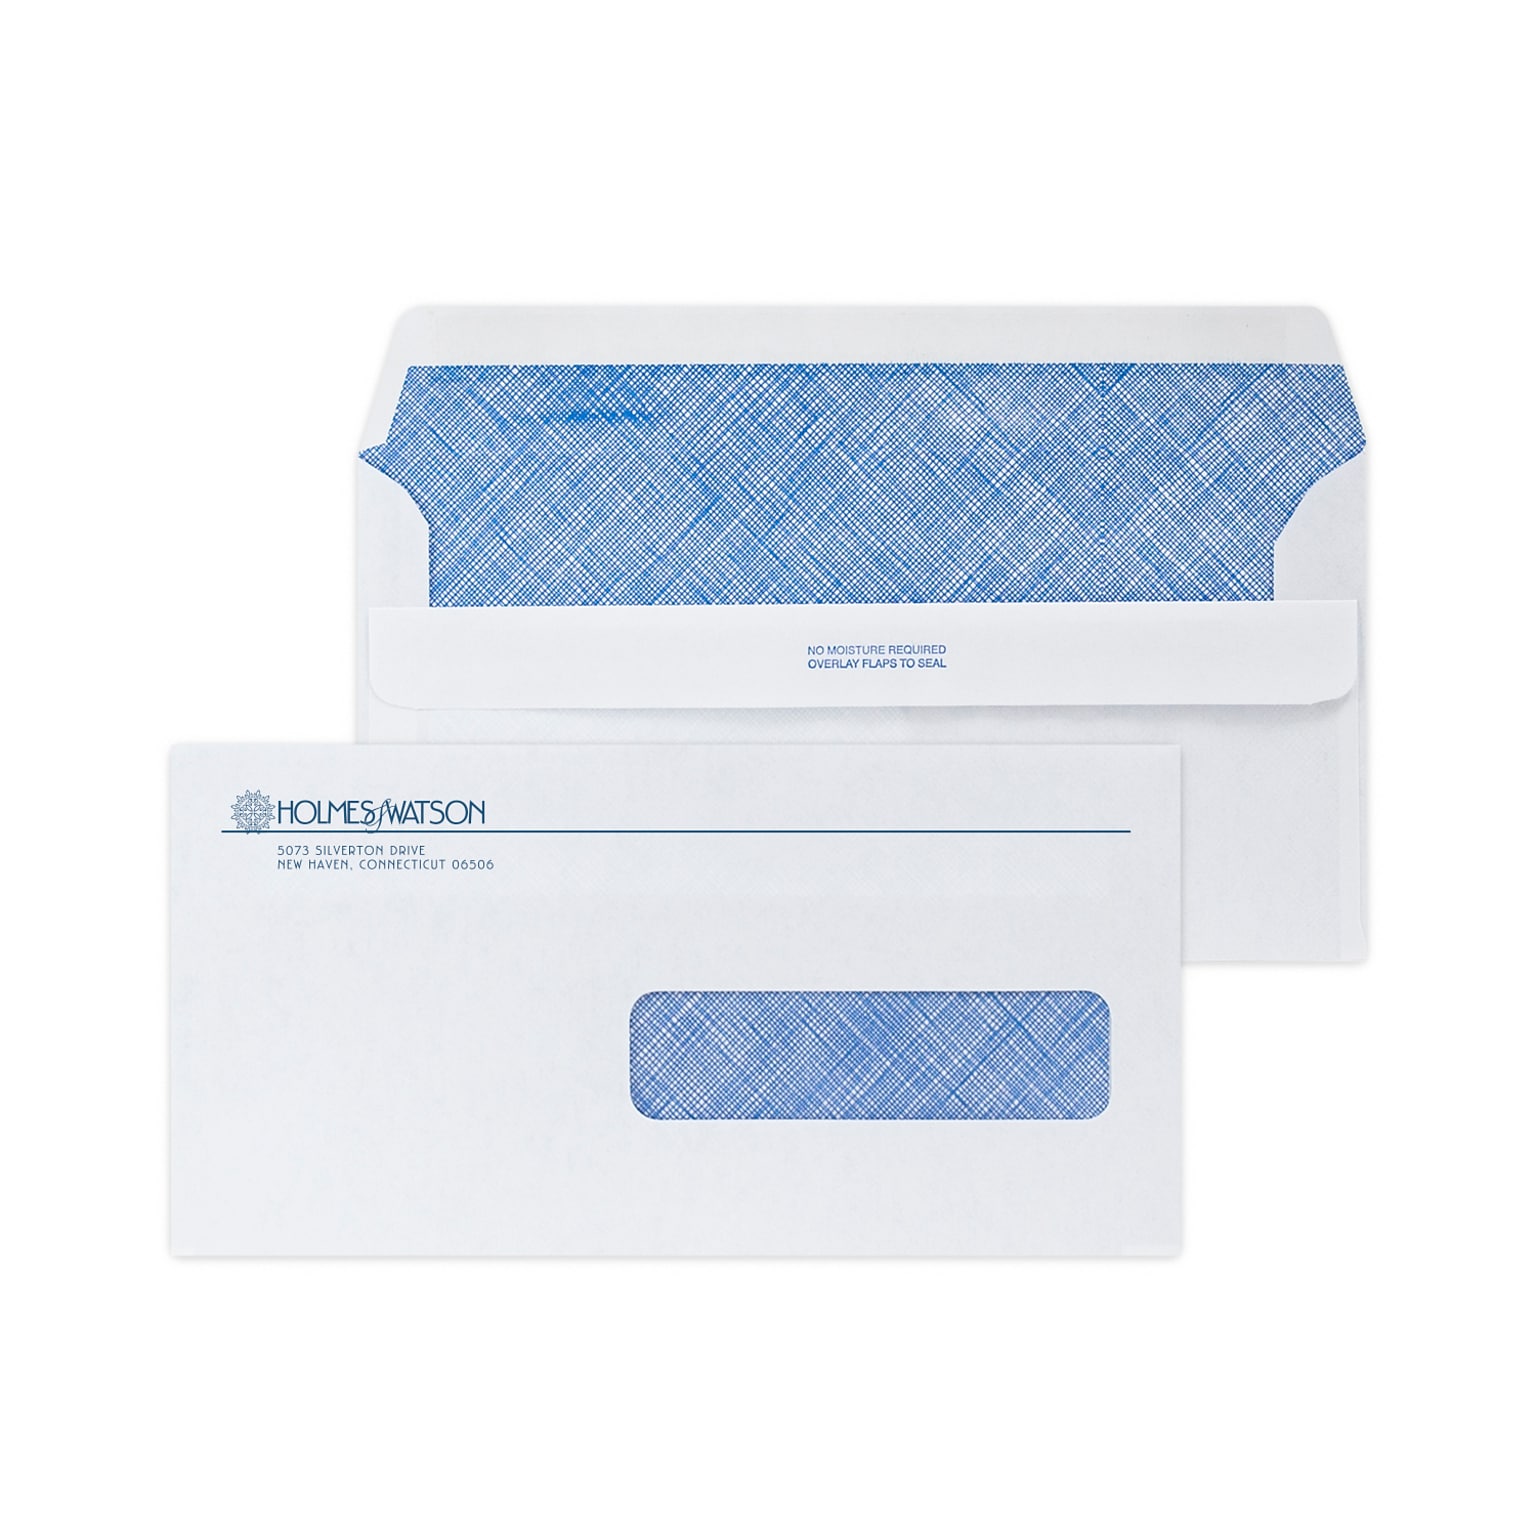 Custom 4-1/2 x 9 Insurance Claim Right Window Self Seal Envelopes with Security Tint, 24# White Wove, 1 Custom Ink, 250 / Pack